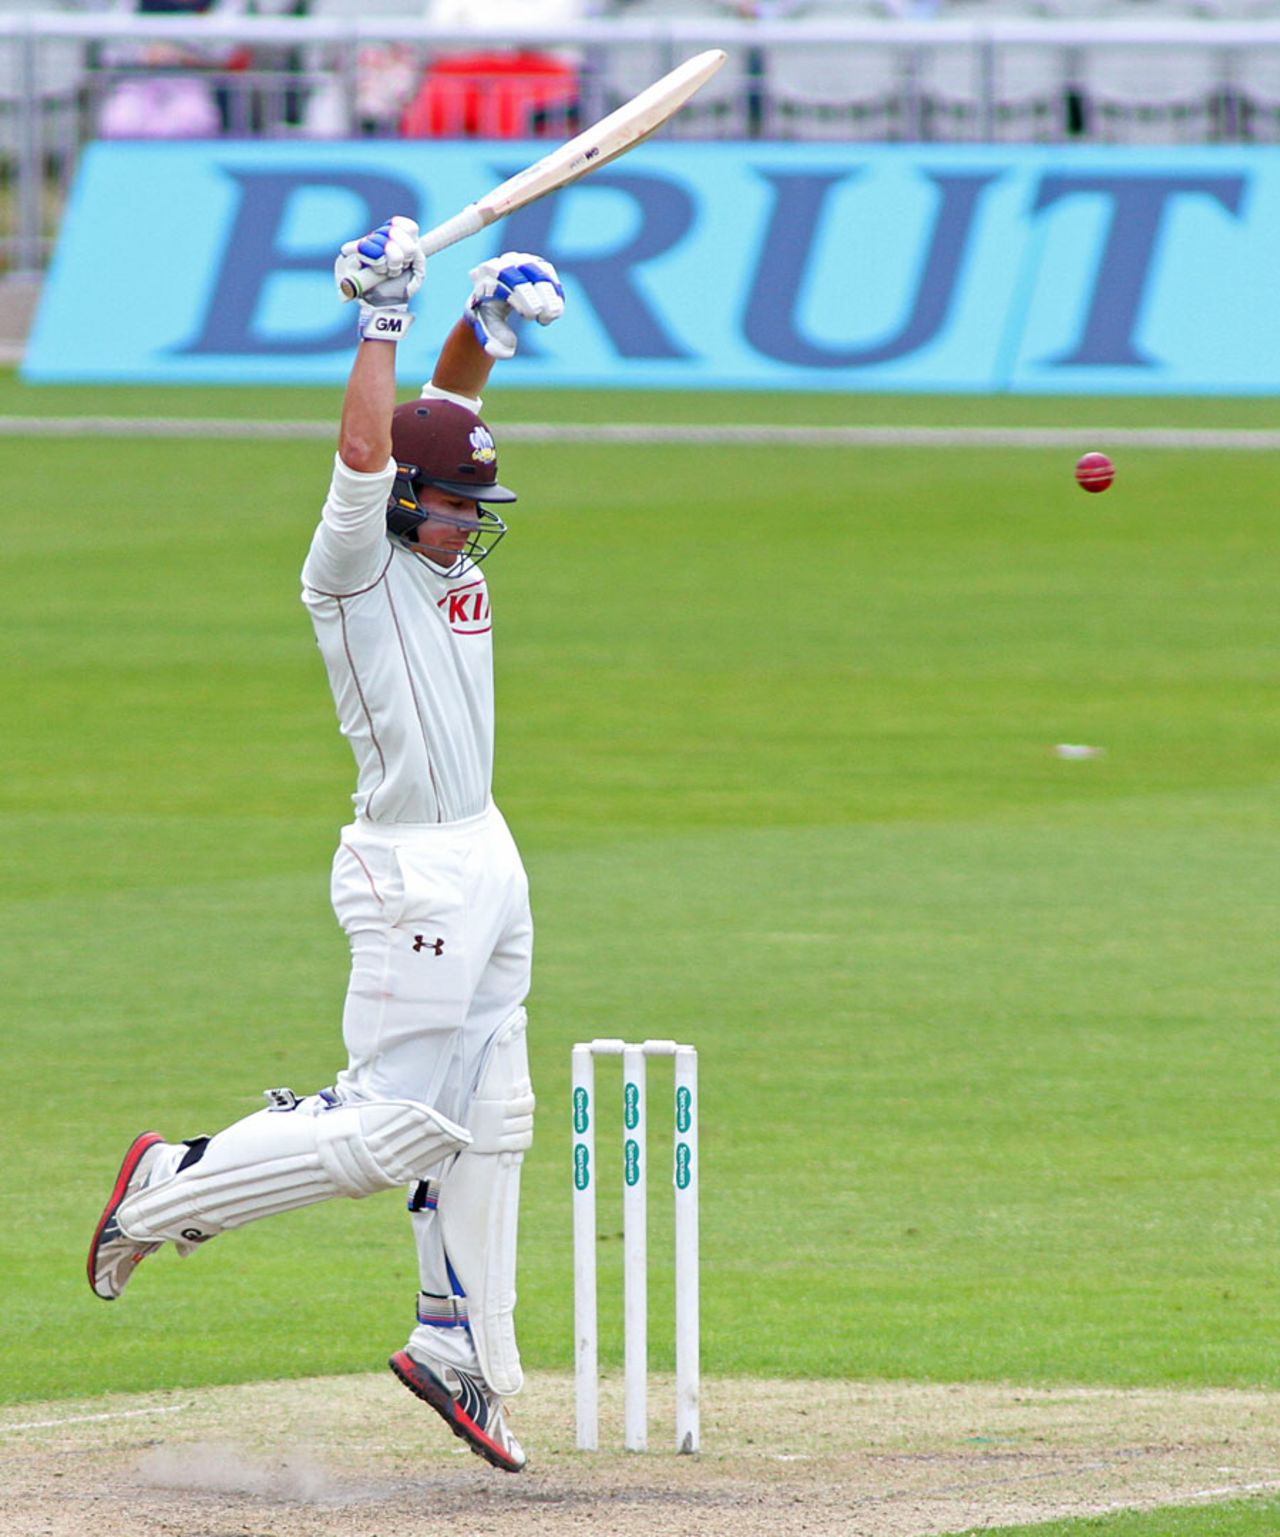 Rory Burns evades a delivery, Lancashire v Surrey, County Championship, Division One, Old Trafford, 1st day, May 22, 2016